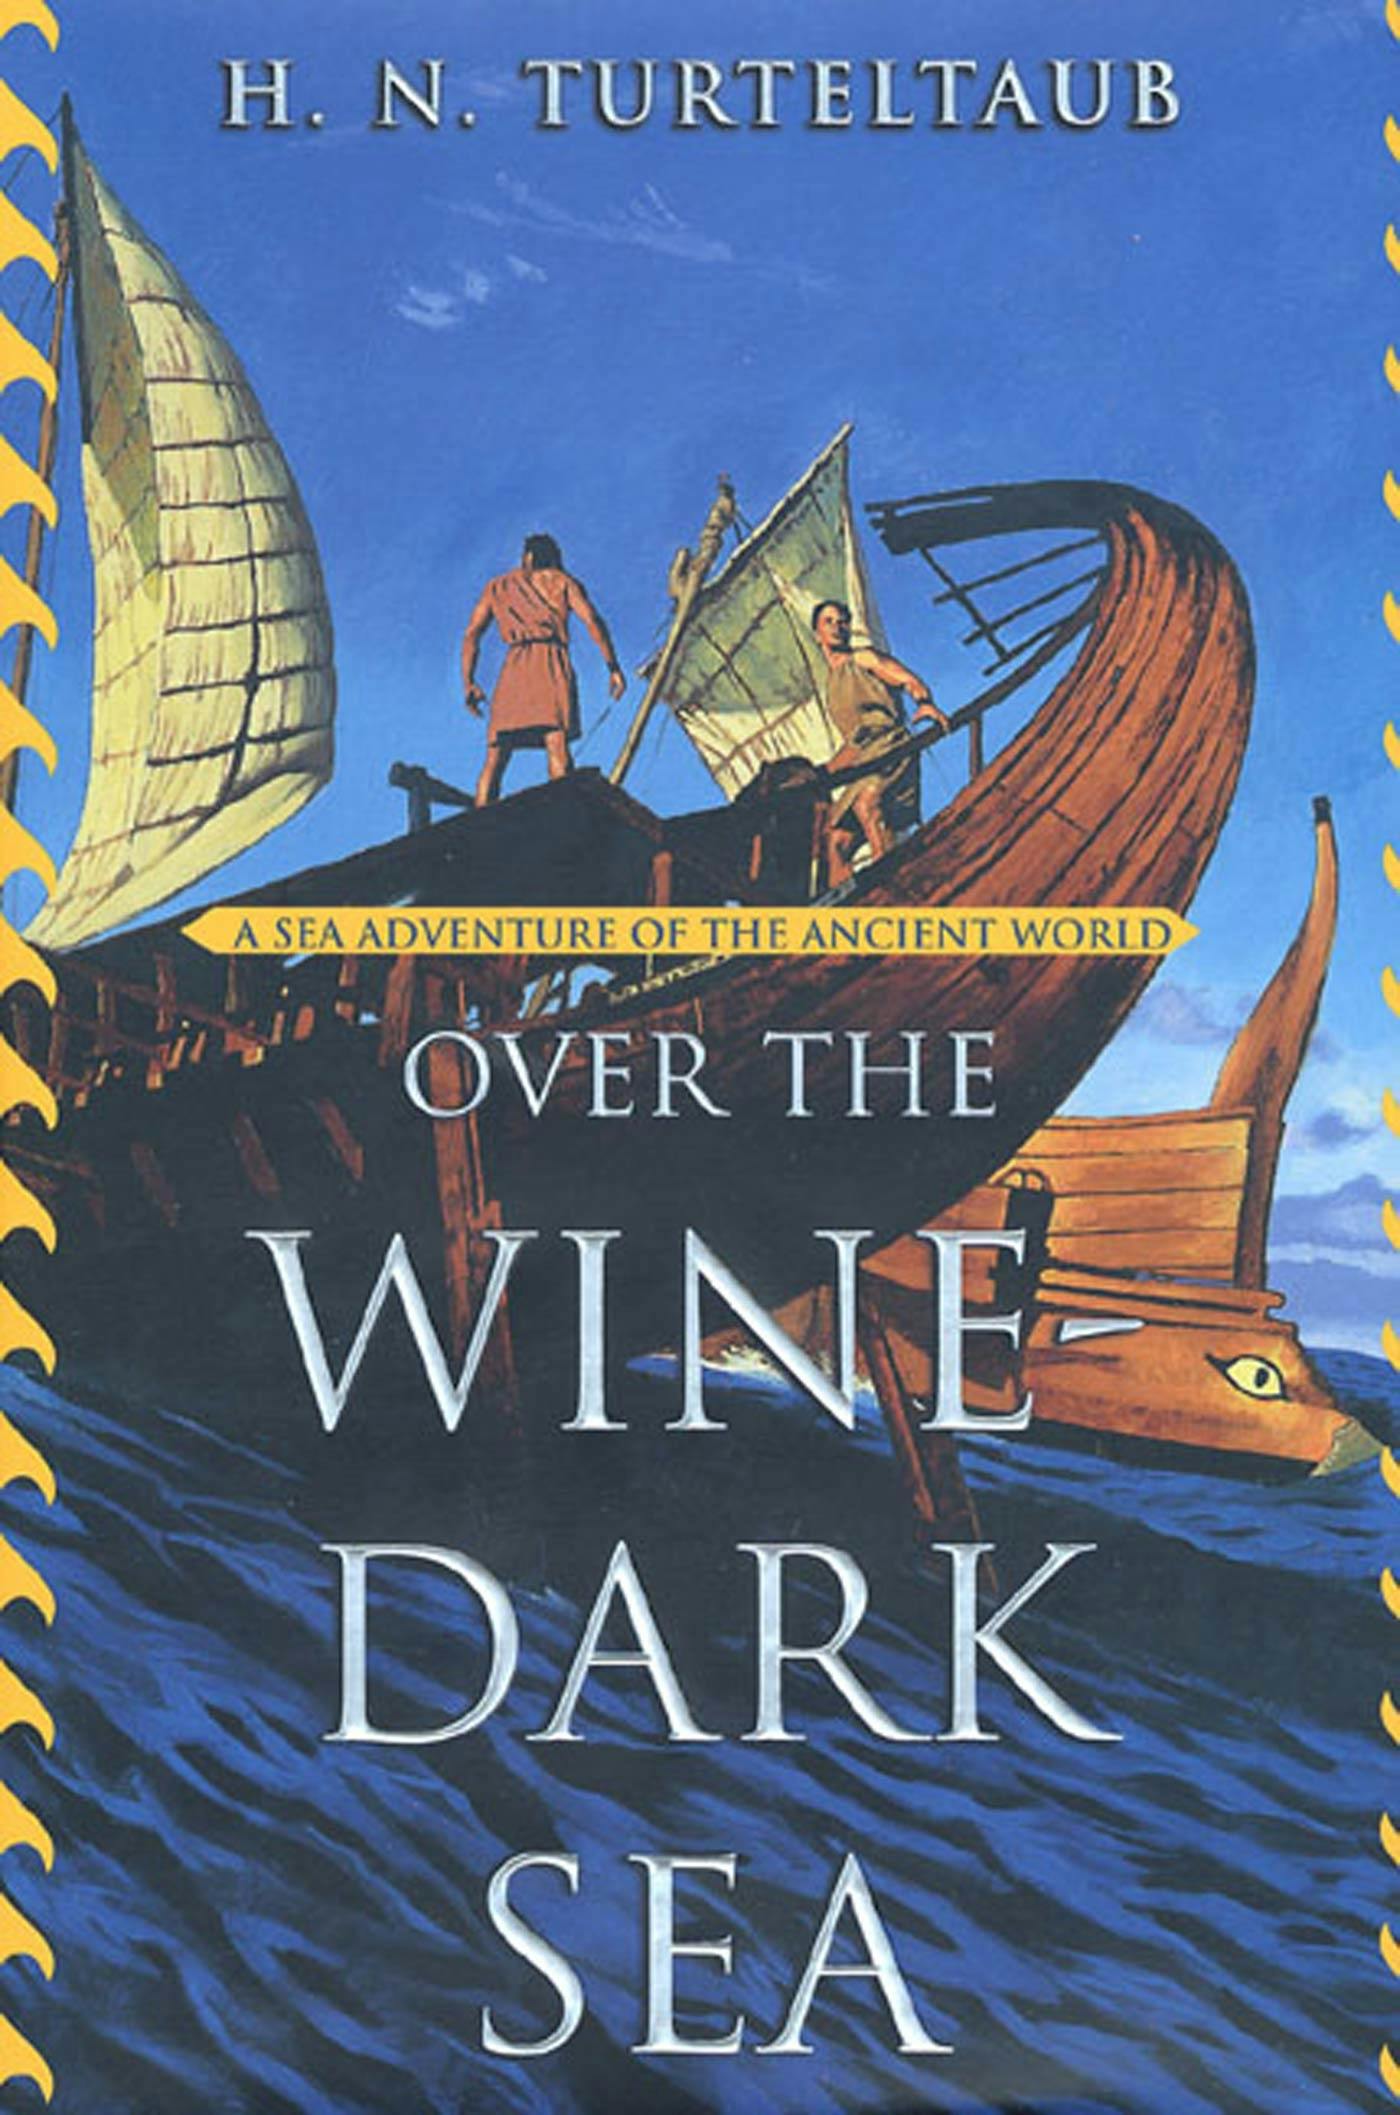 Cover for the book titled as: Over the Wine-Dark Sea